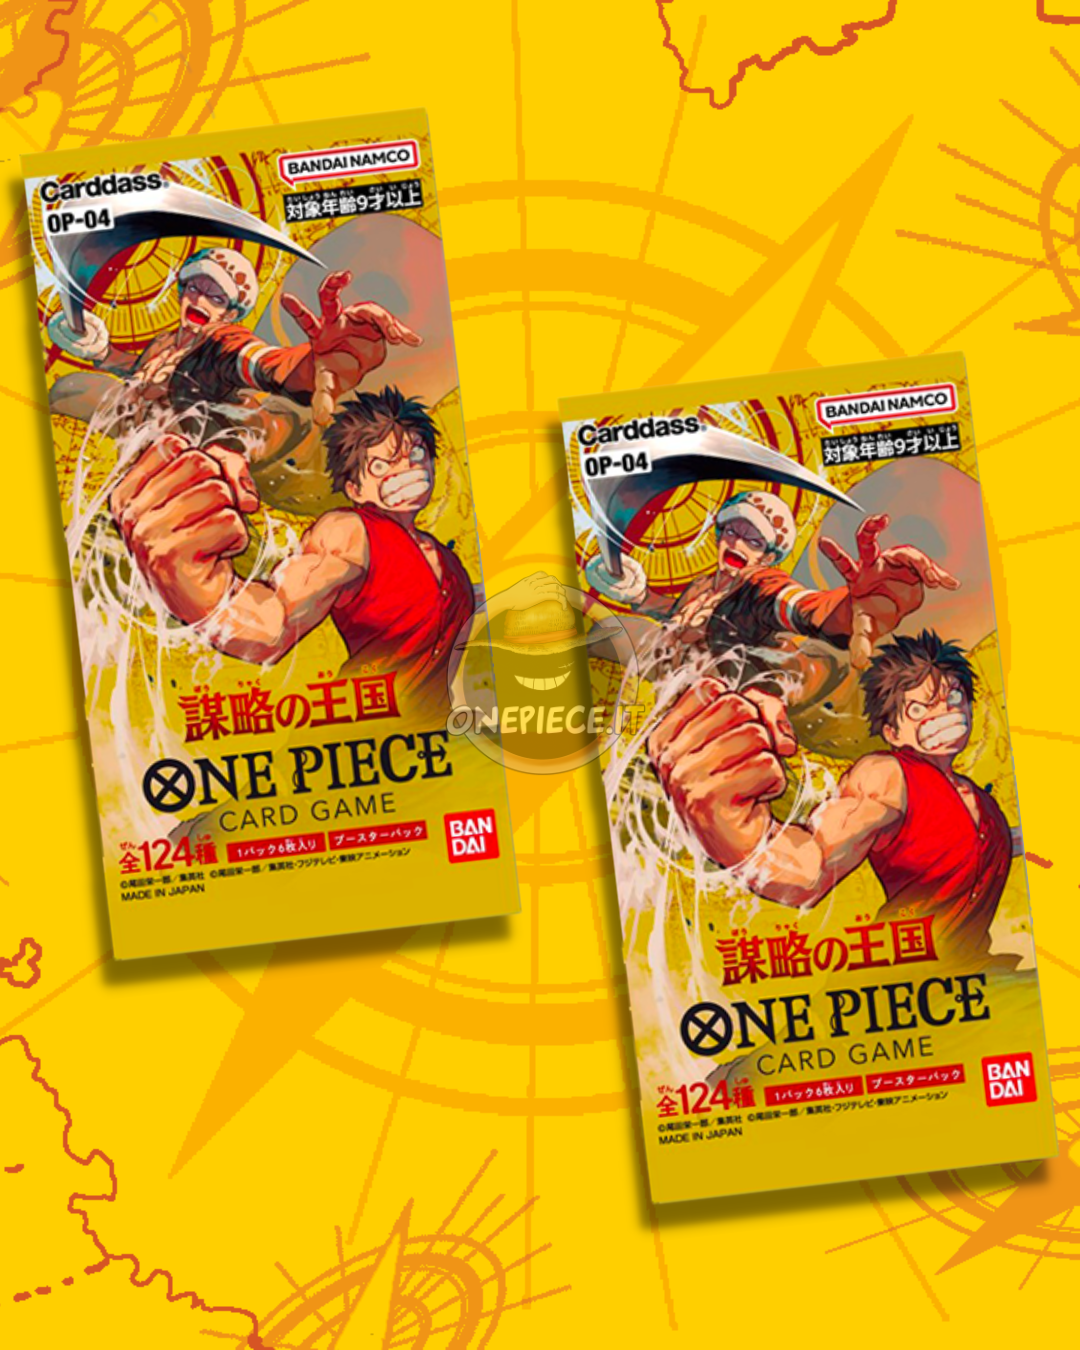 one piece card game
